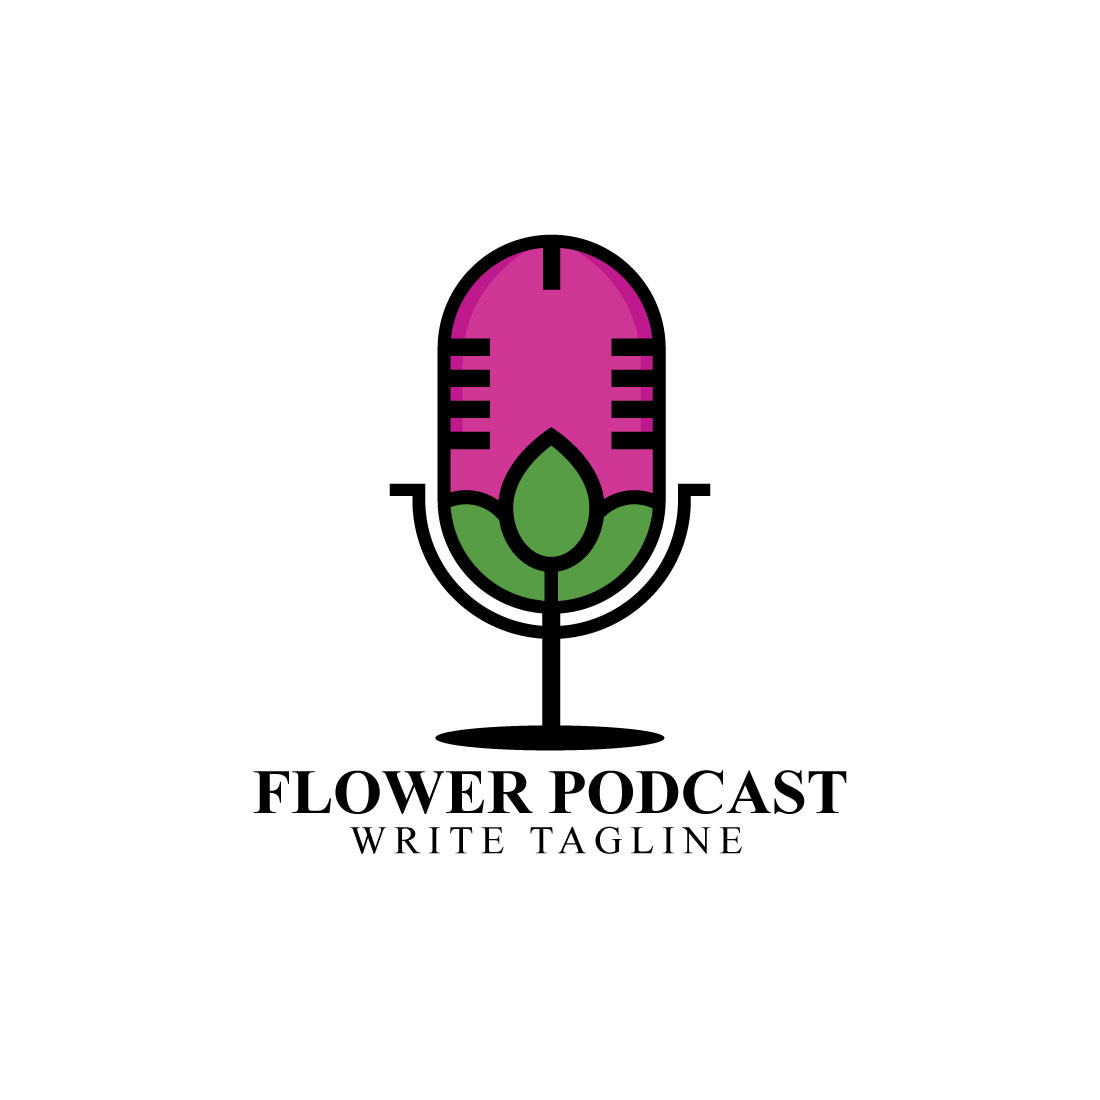 Flower podcast logo design vector template preview image.